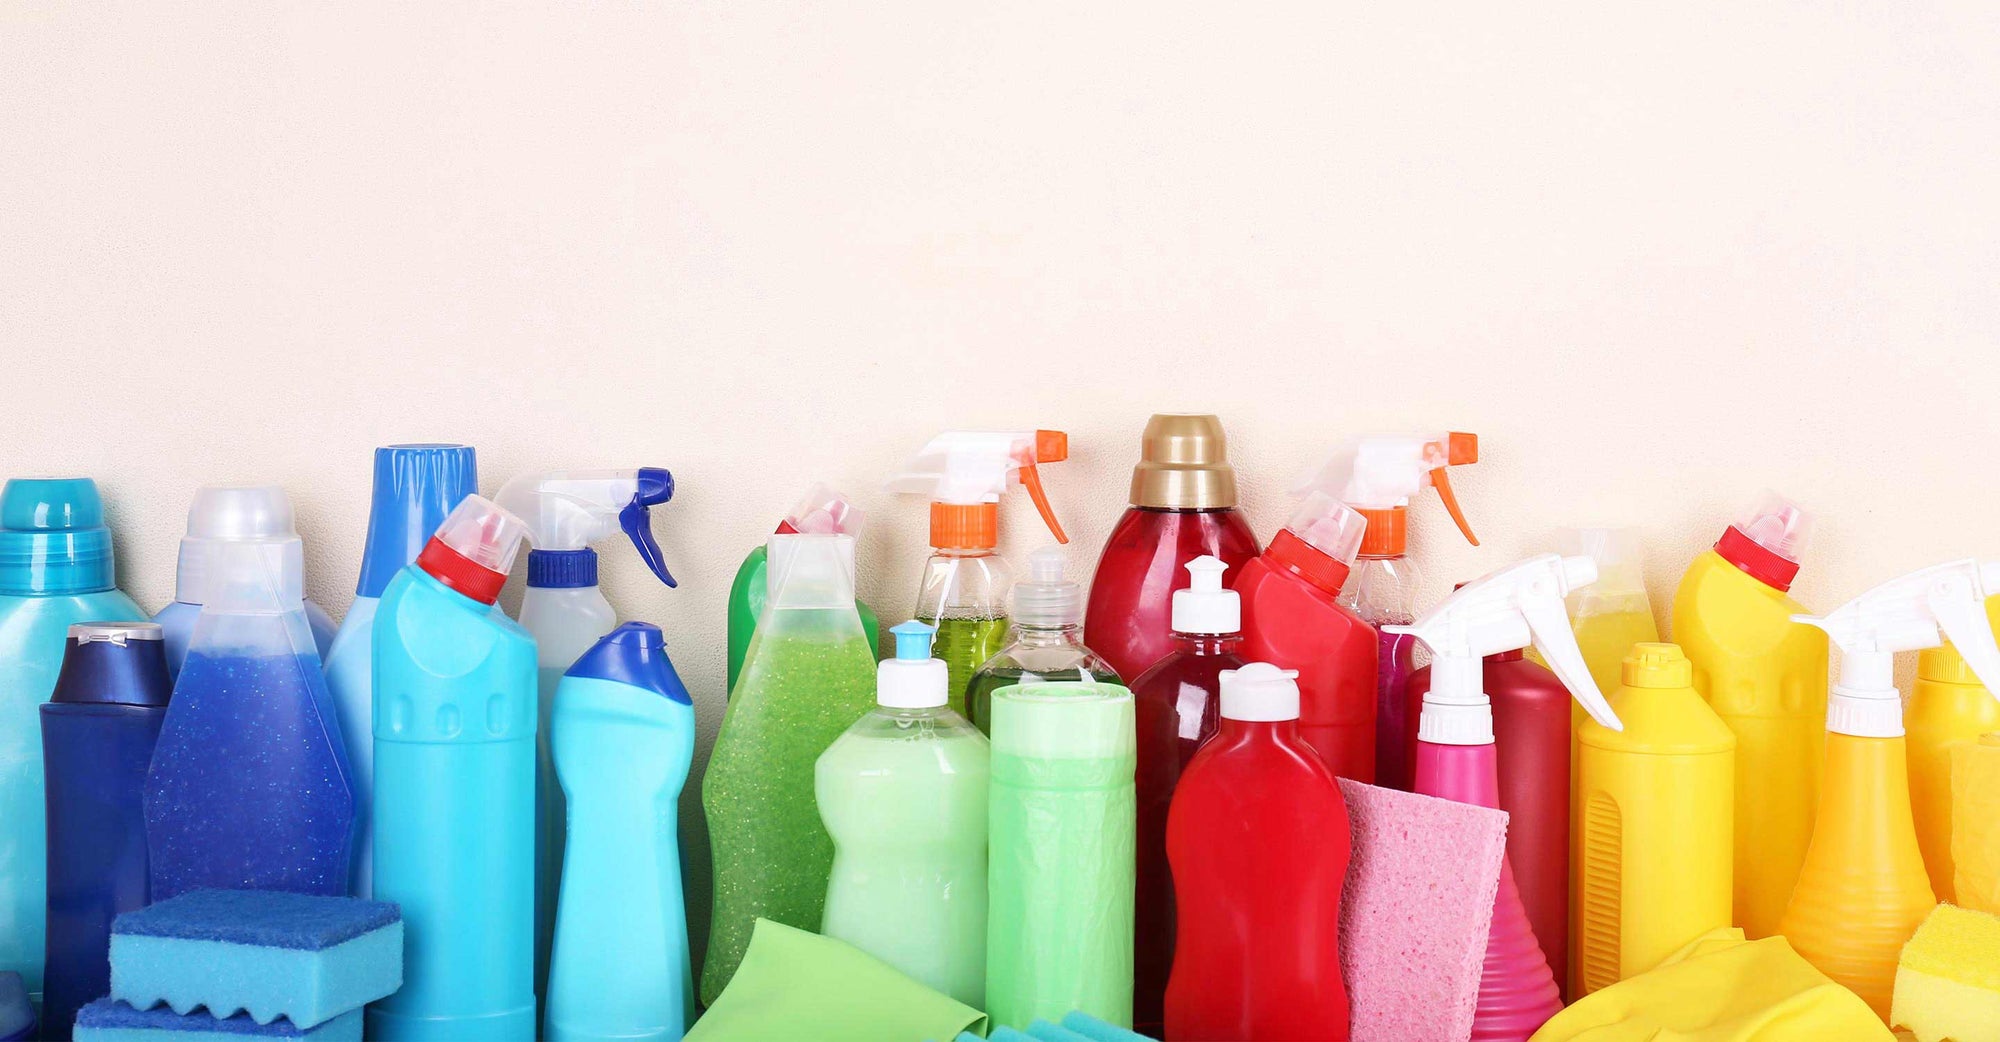 Empty household cleaning bottles